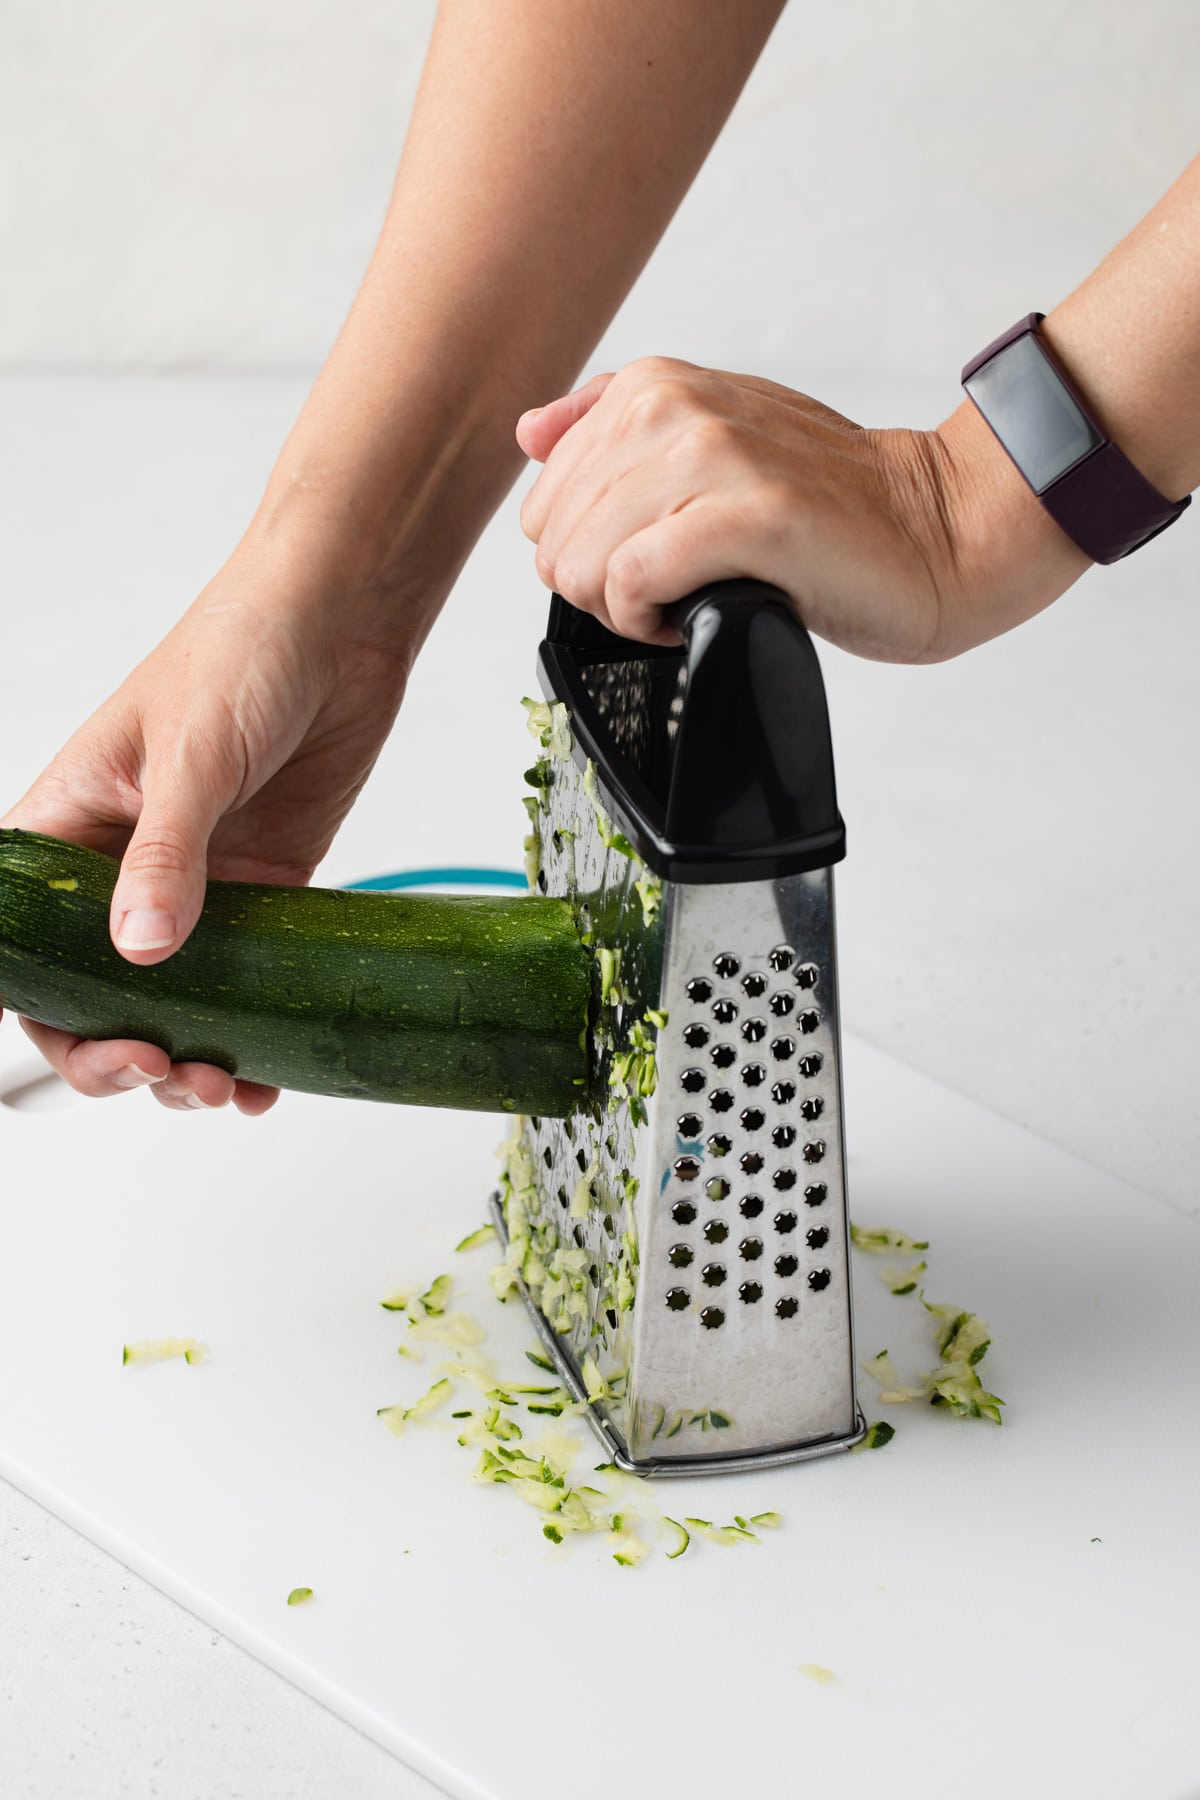 zucchini shredded with box grater